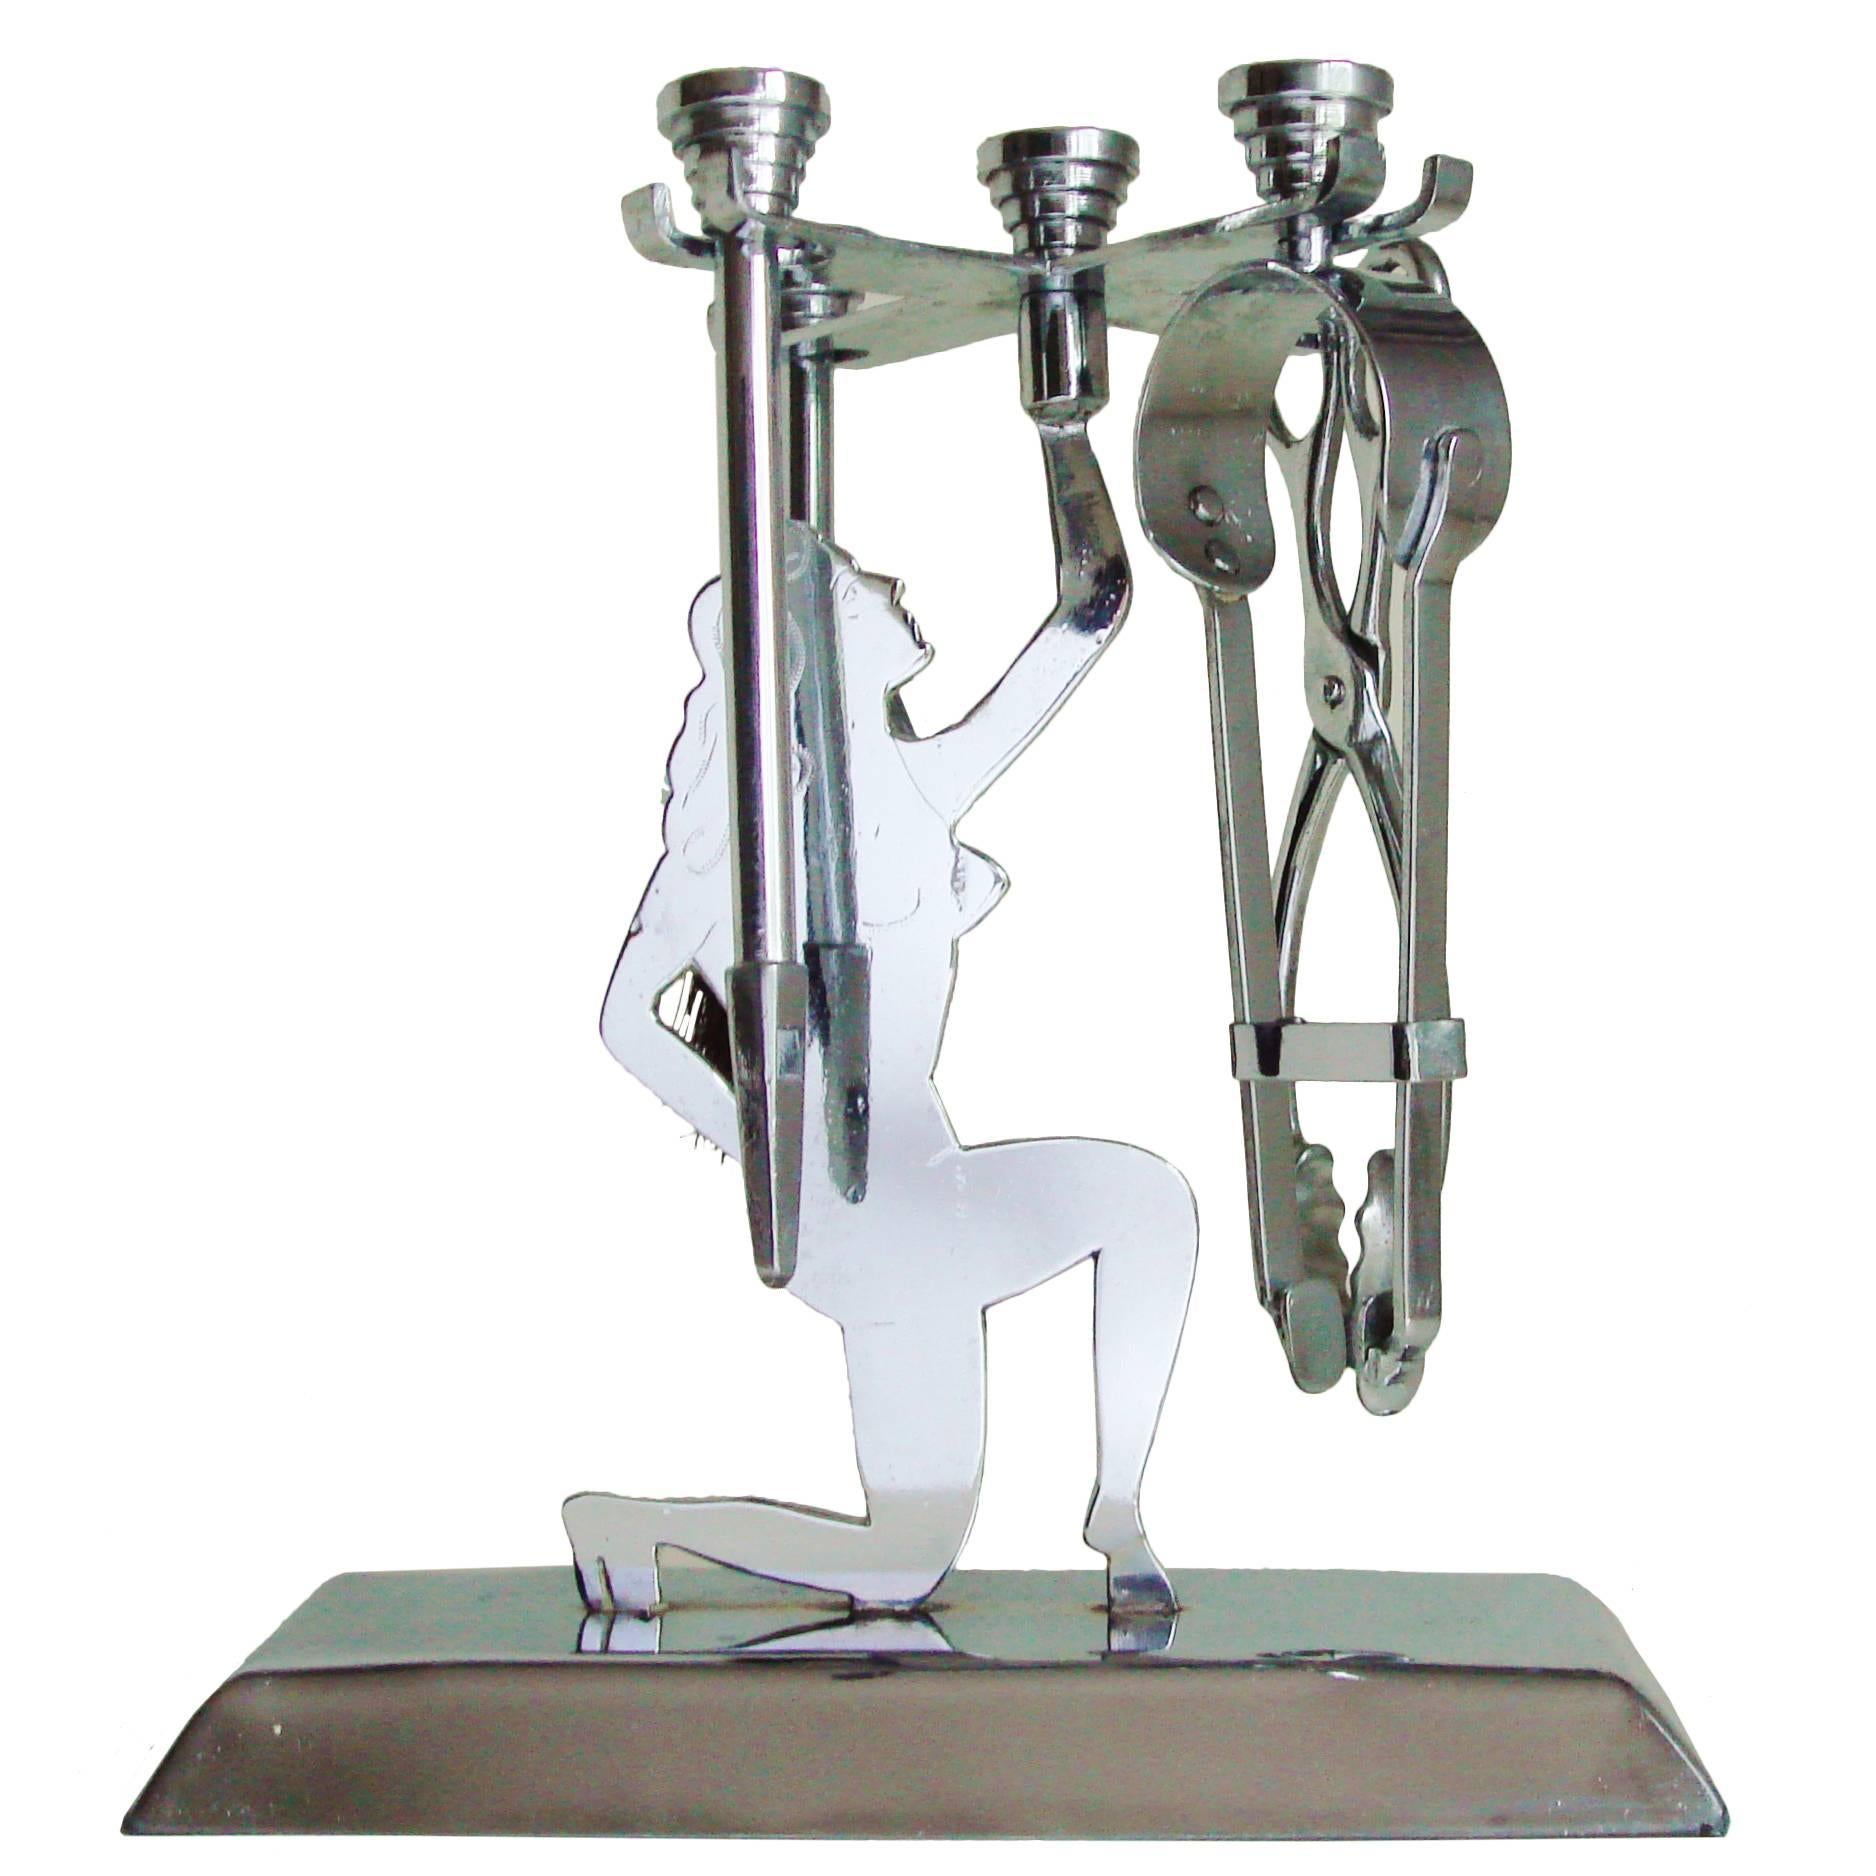 English Art Deco Chrome-Plated Trench Art Five-Piece Figural Small Fire-Tool Set For Sale